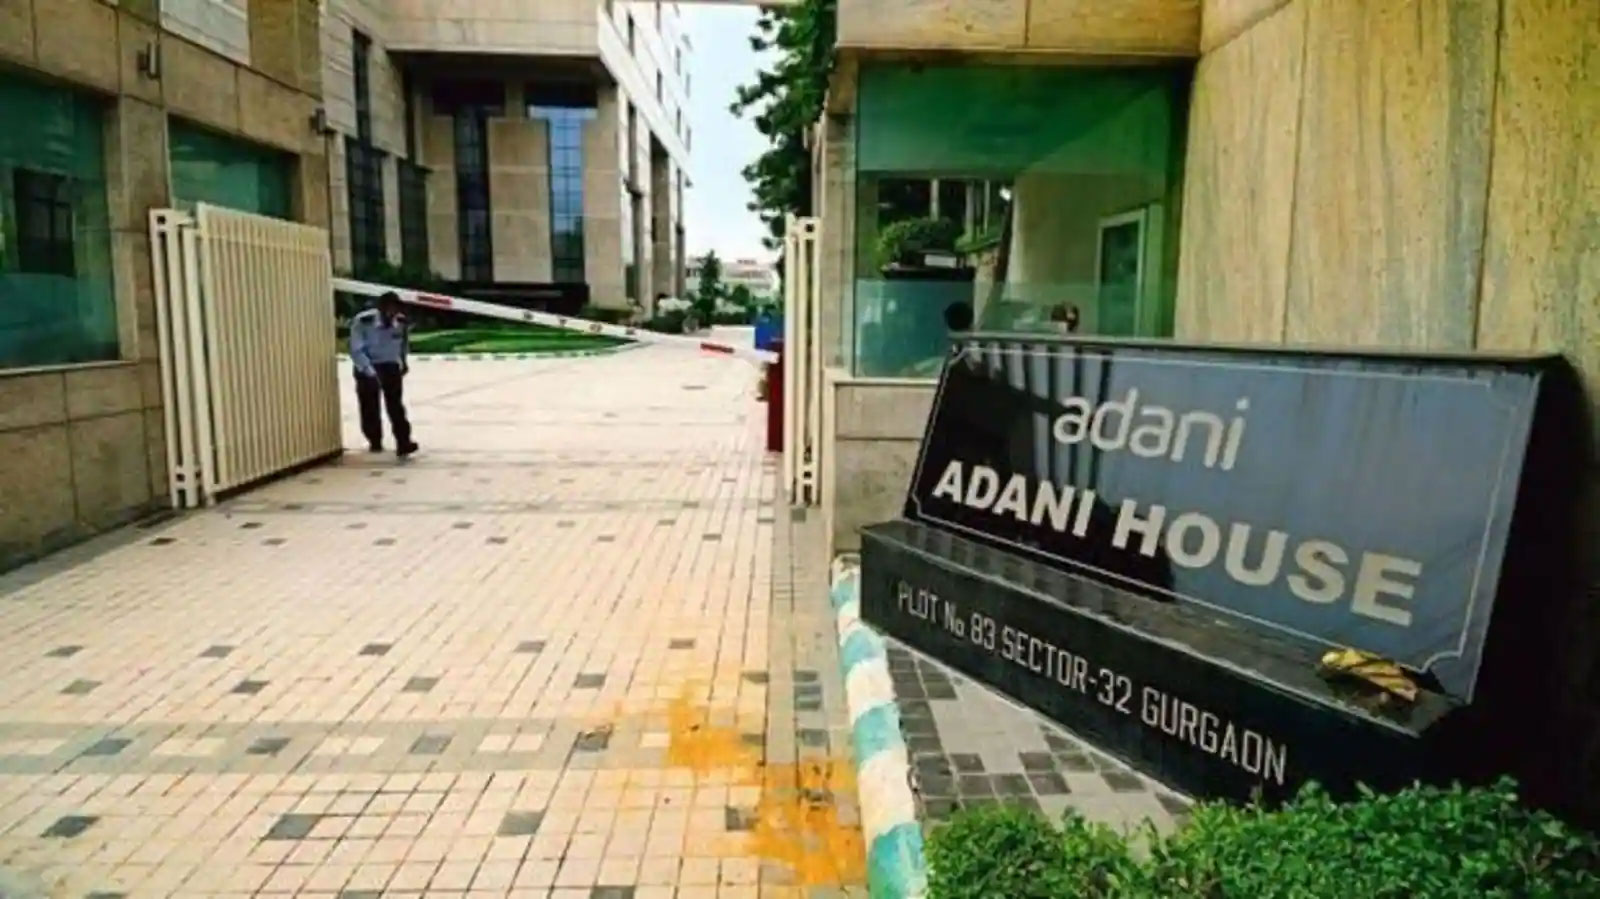 Do You Know Where Does Gautam Adani Live and its Worth?